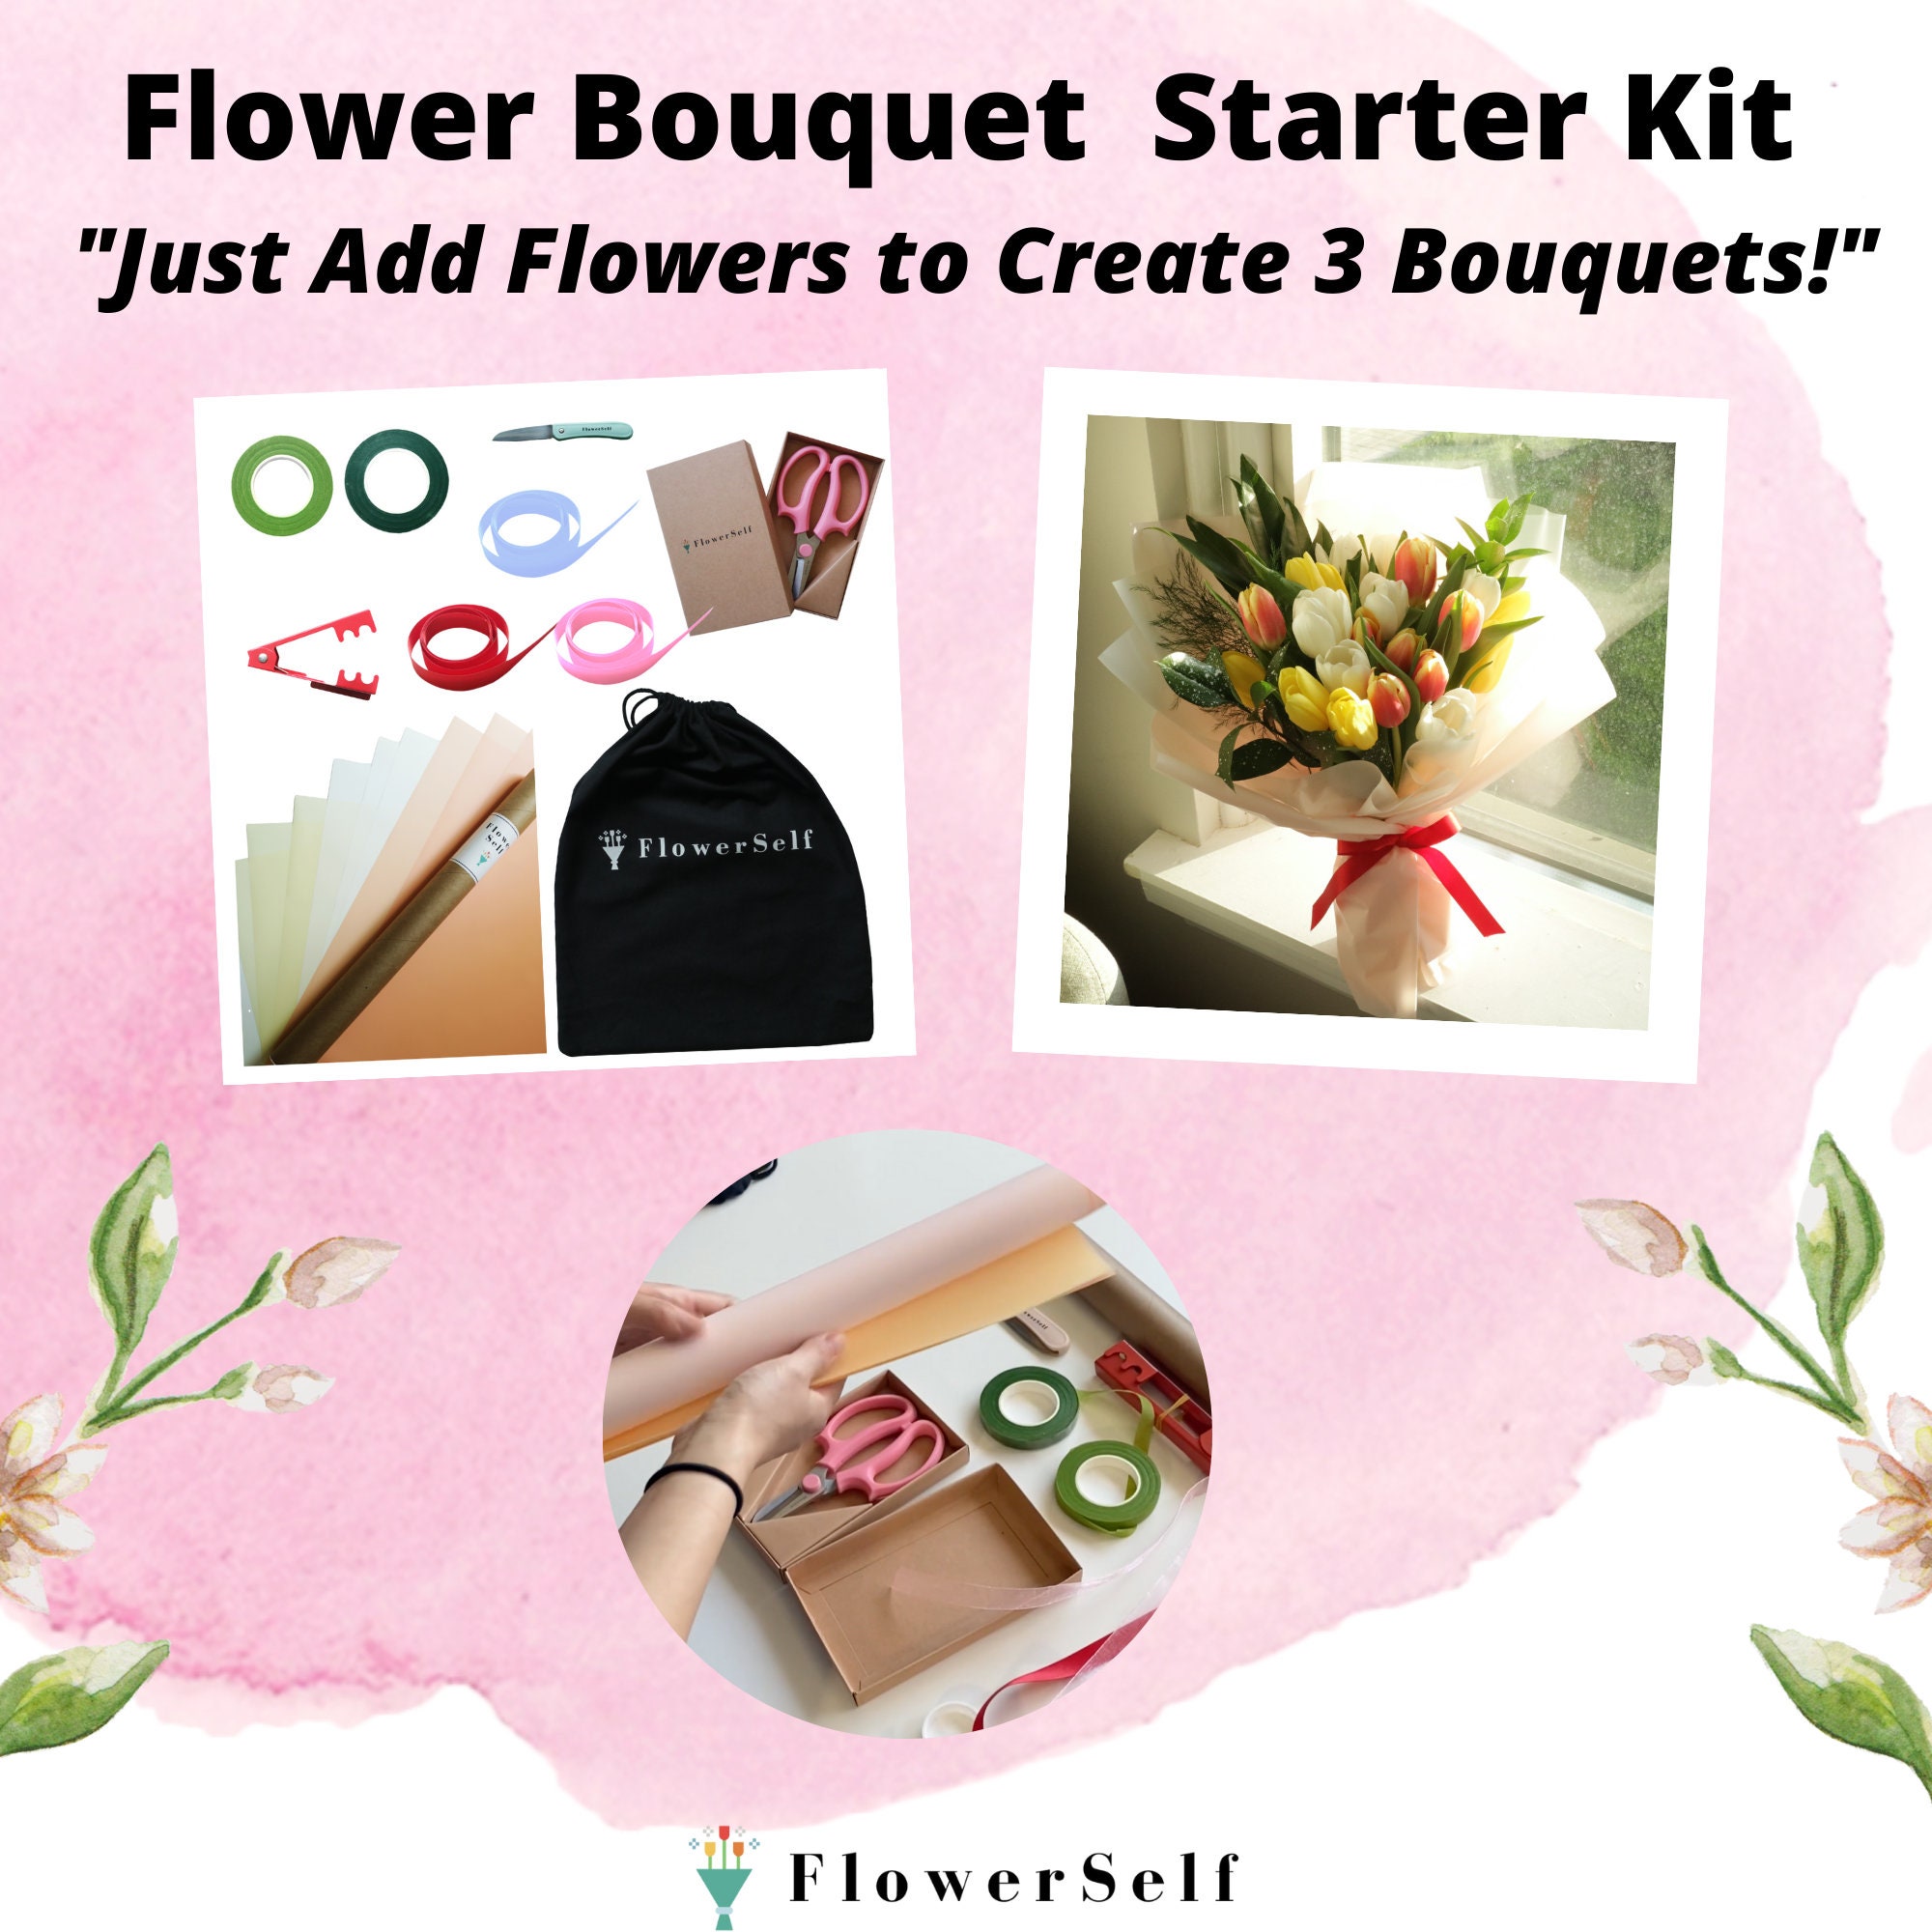 Flower Bouquet Design Starter Kit With Florist Tools, Floral Bouquet and  Flower Design Using Korean Style Waterproof Wrap, Create 3 Bouquets 